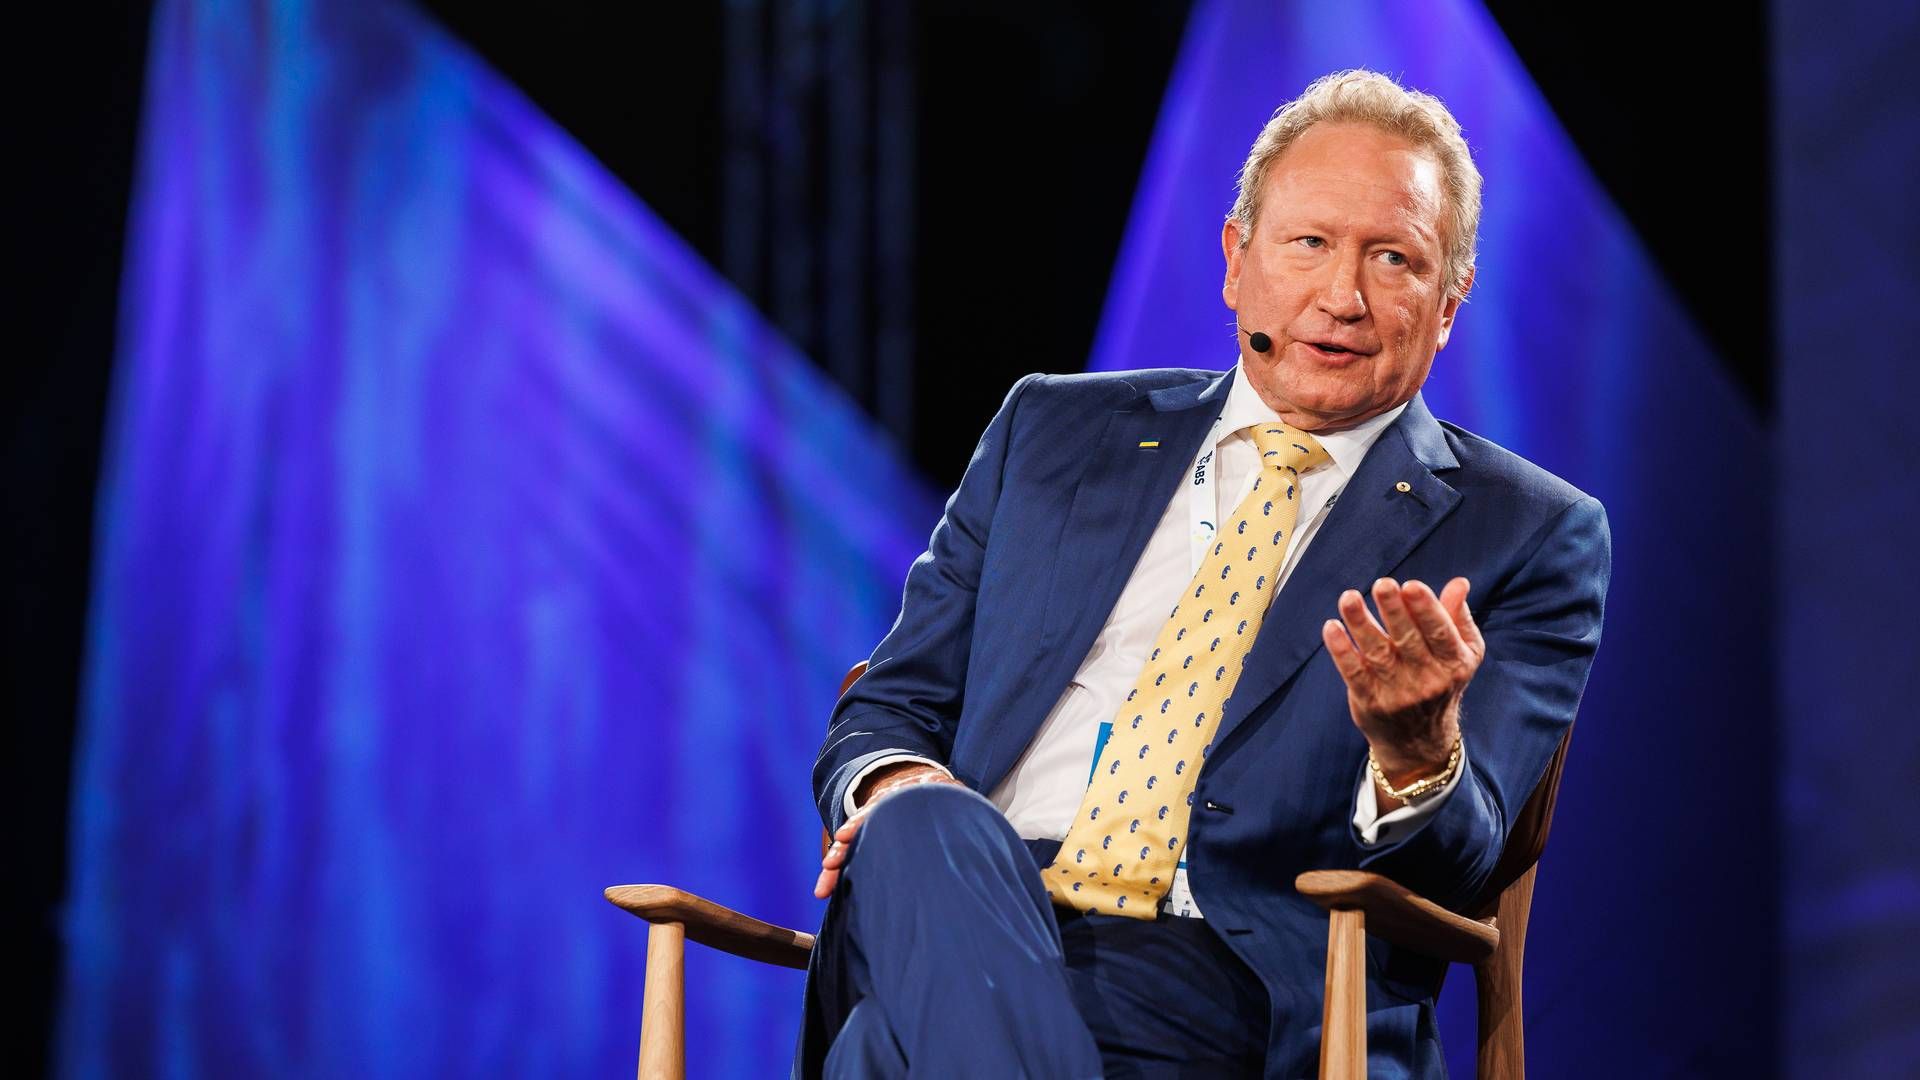 Founder of Fortescue Metals Group, Andrew Forrest. | Photo: Nor-shipping